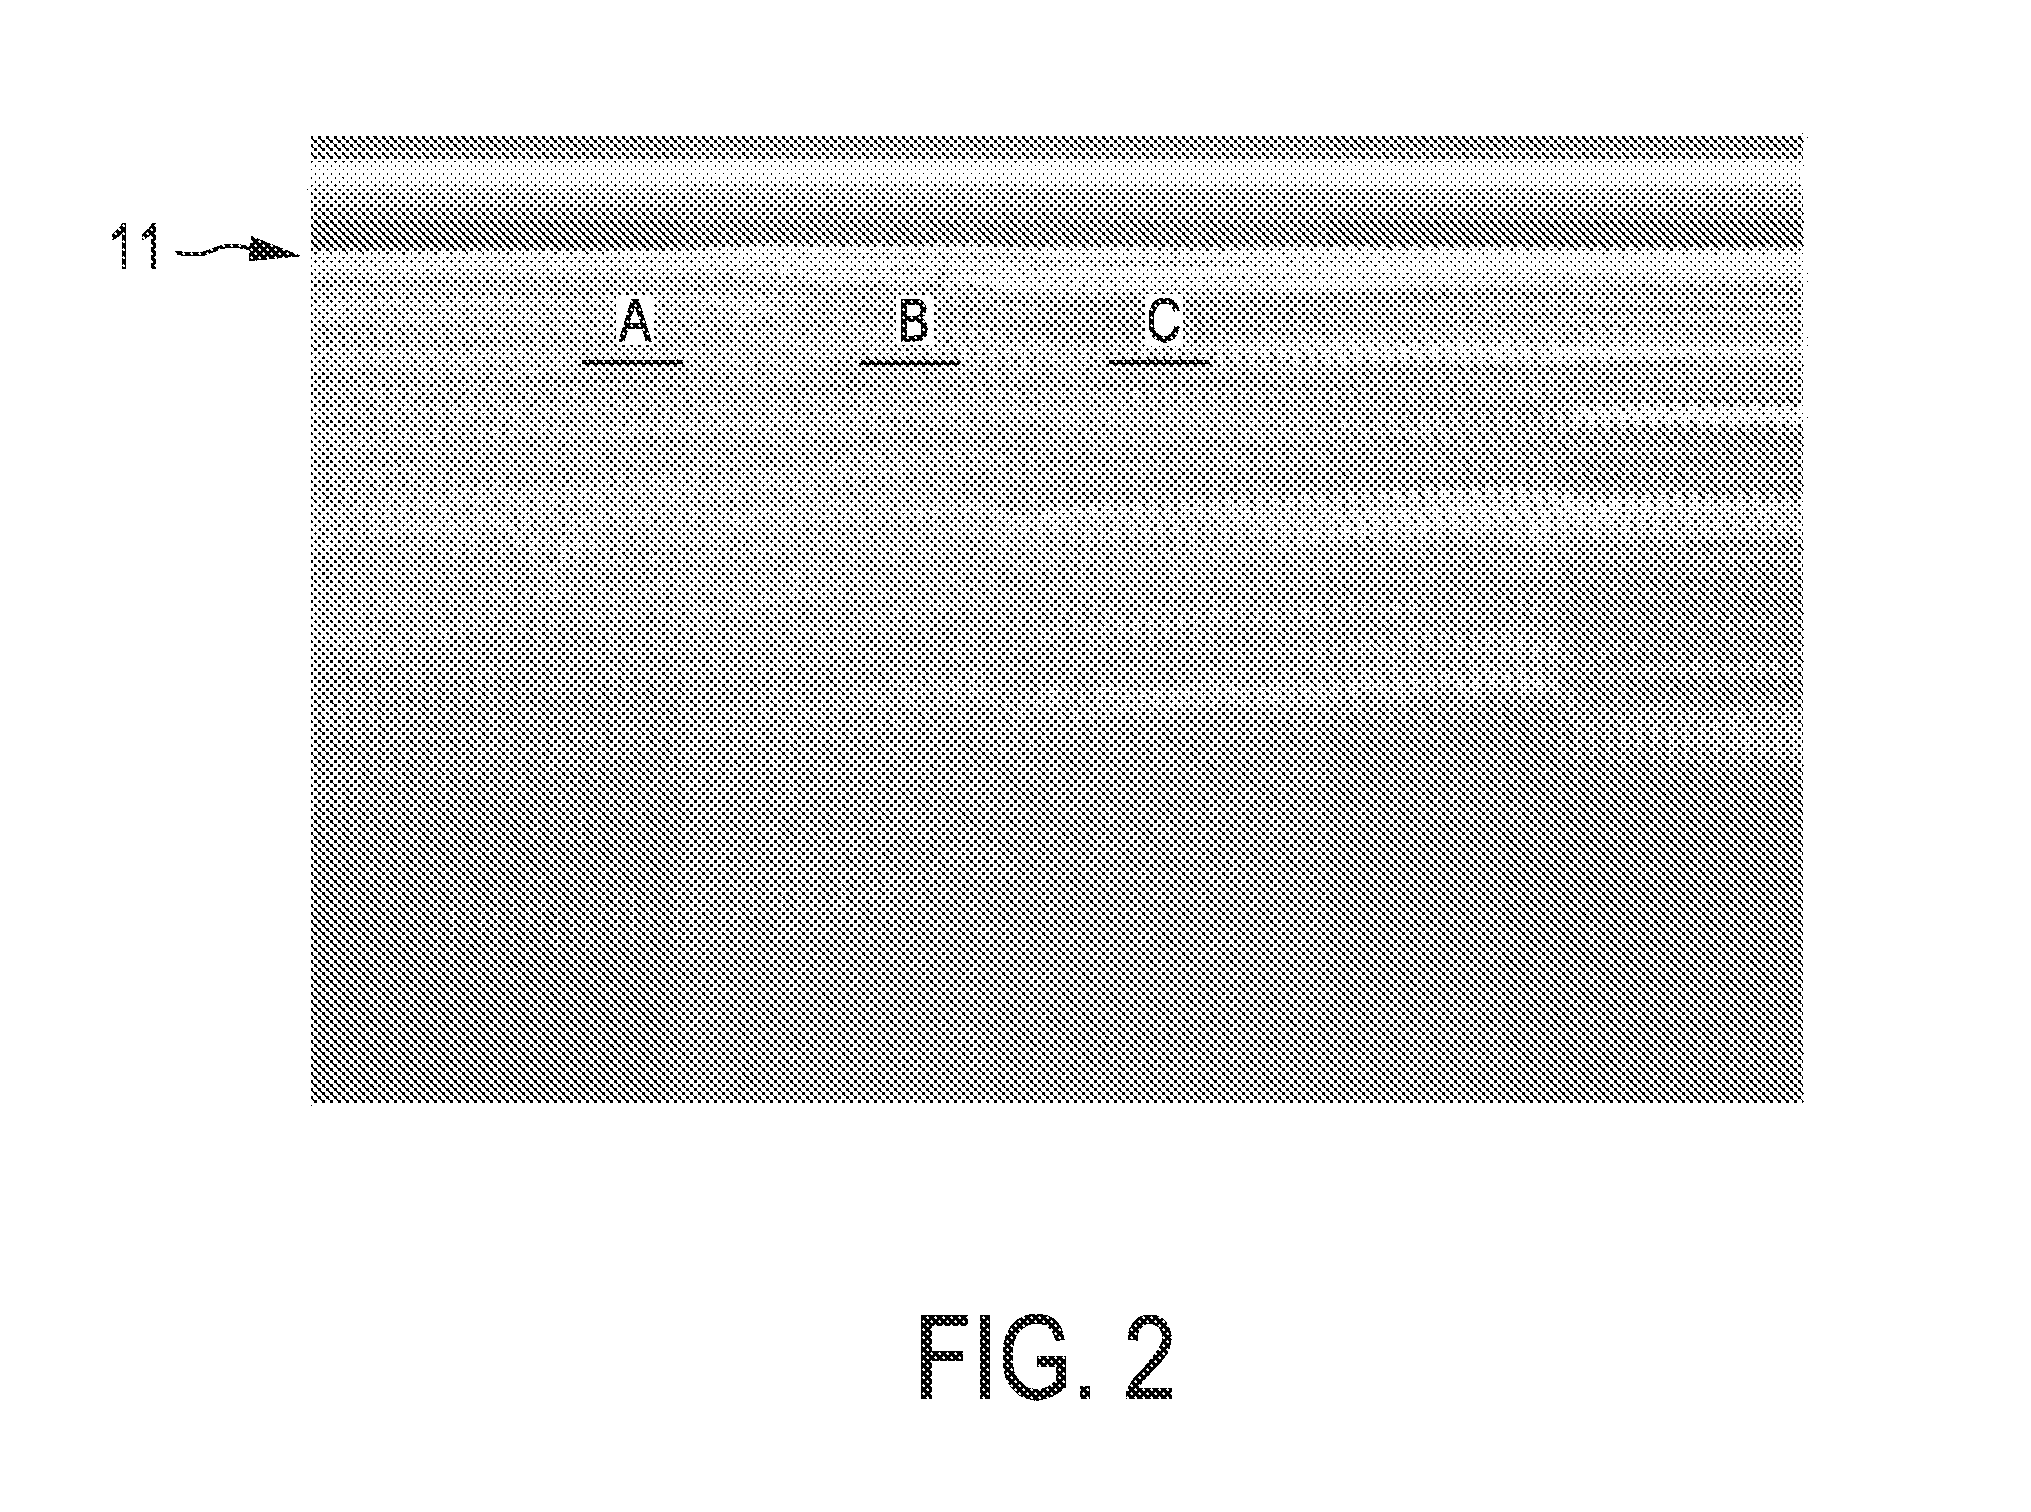 Apparatus for being used for detecting a property of an object